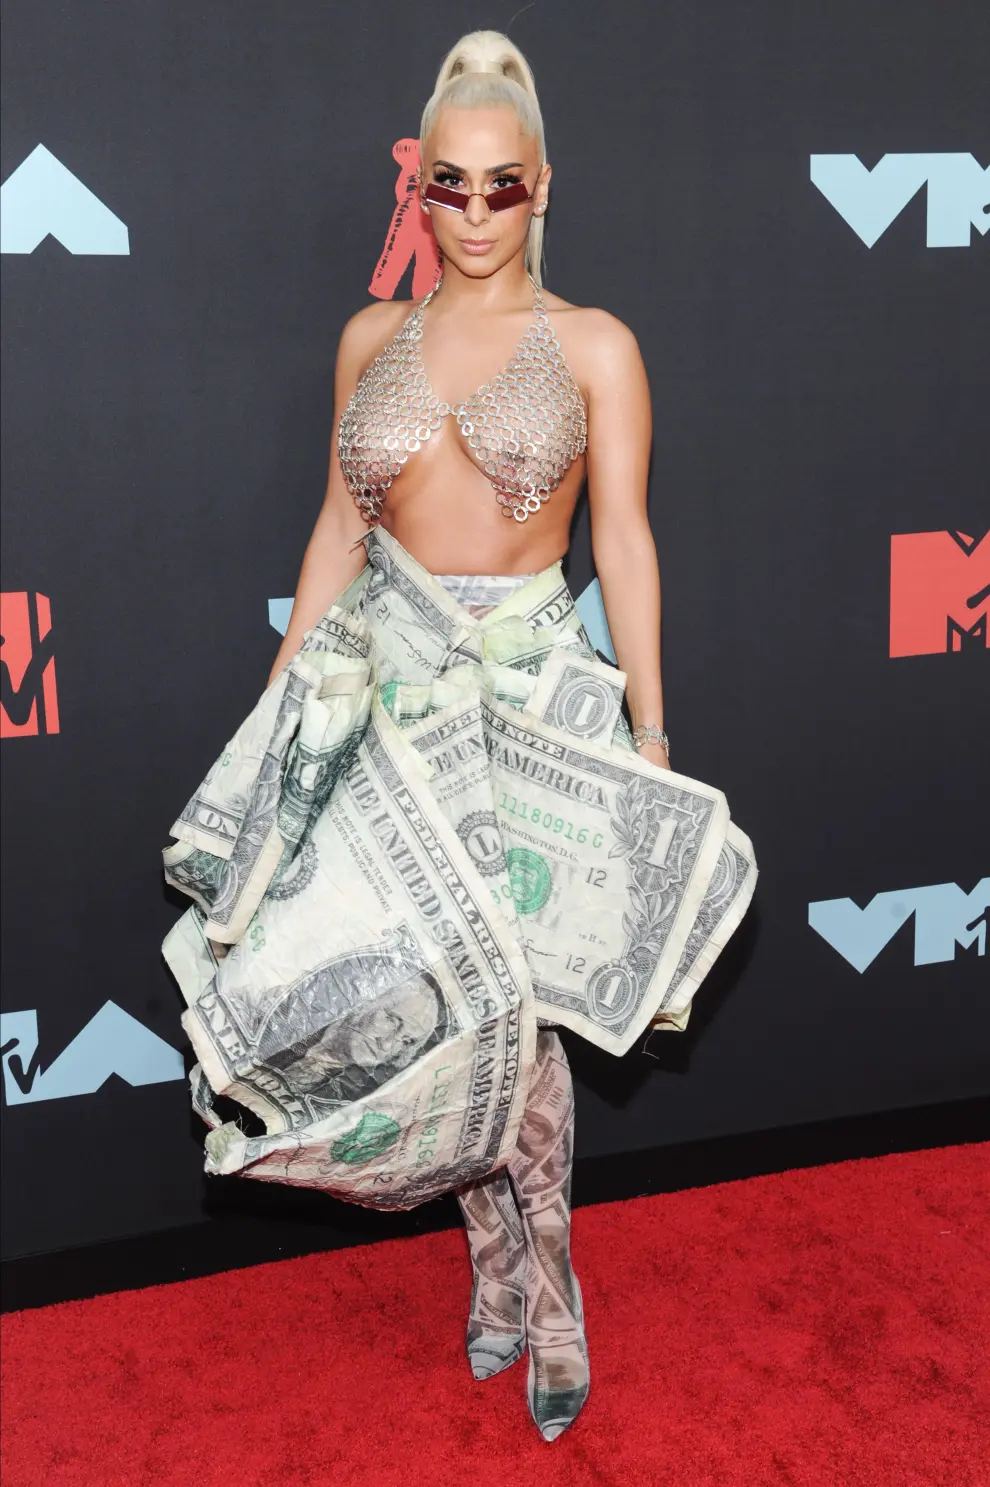 New York (United States), 26/08/2019.- US singer Peppermint arrives on the red carpet for the 2019 MTV Video Music Awards at Radio City Music Hall in New York, New York, USA, 26 August 2019. (Estados Unidos, Nueva York) EFE/EPA/DJ JOHNSON 2019 MTV Video Music Awards in New York